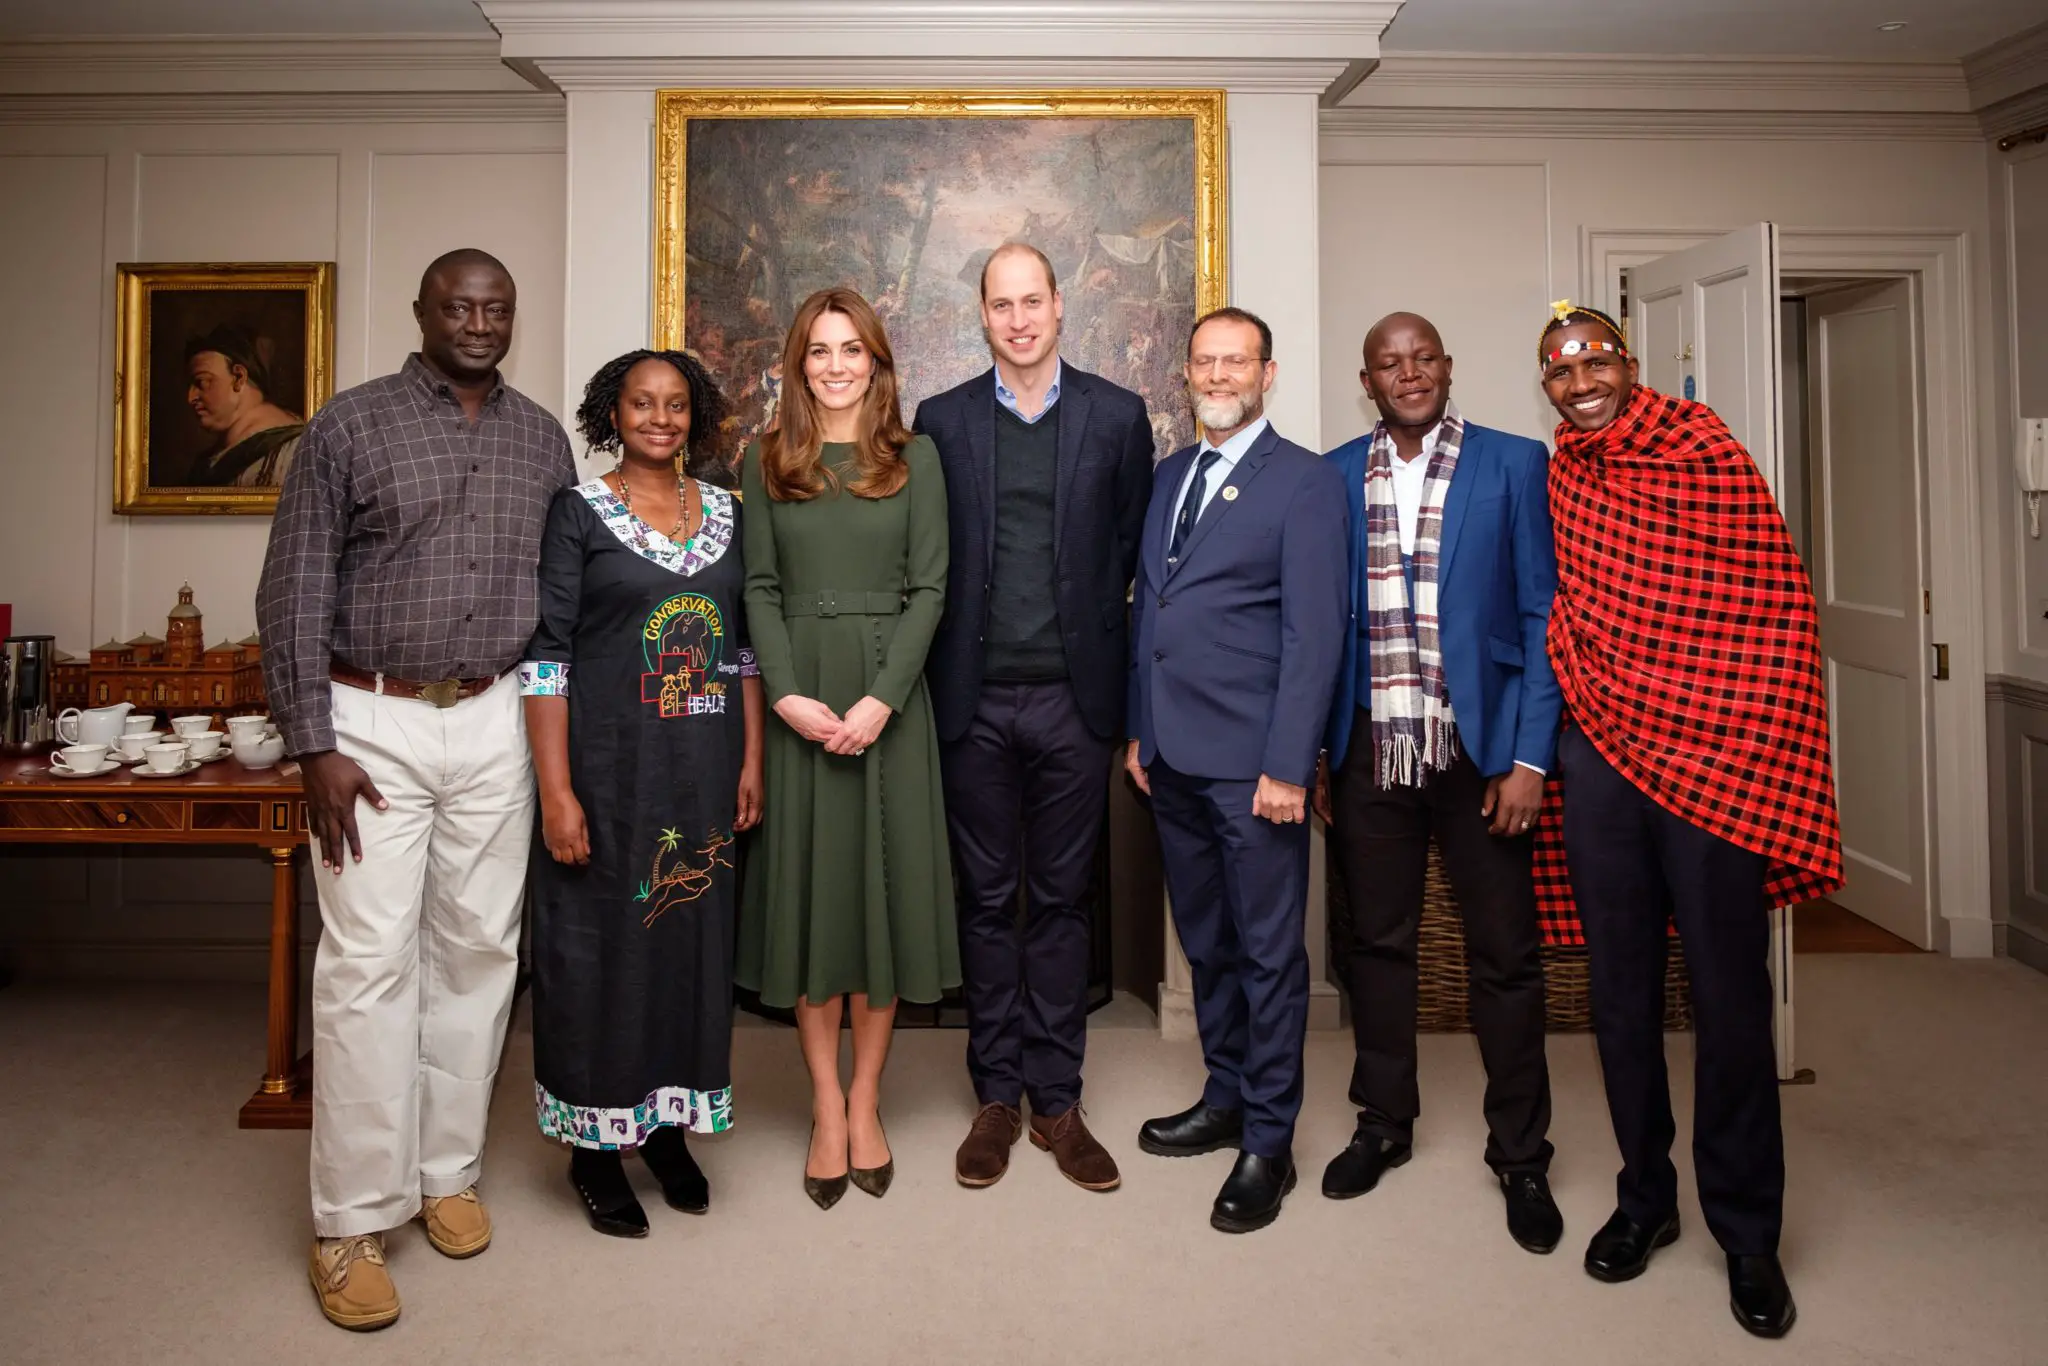 The Duke and Duchess of Cambridge met with Tusk Nominees and Finalists